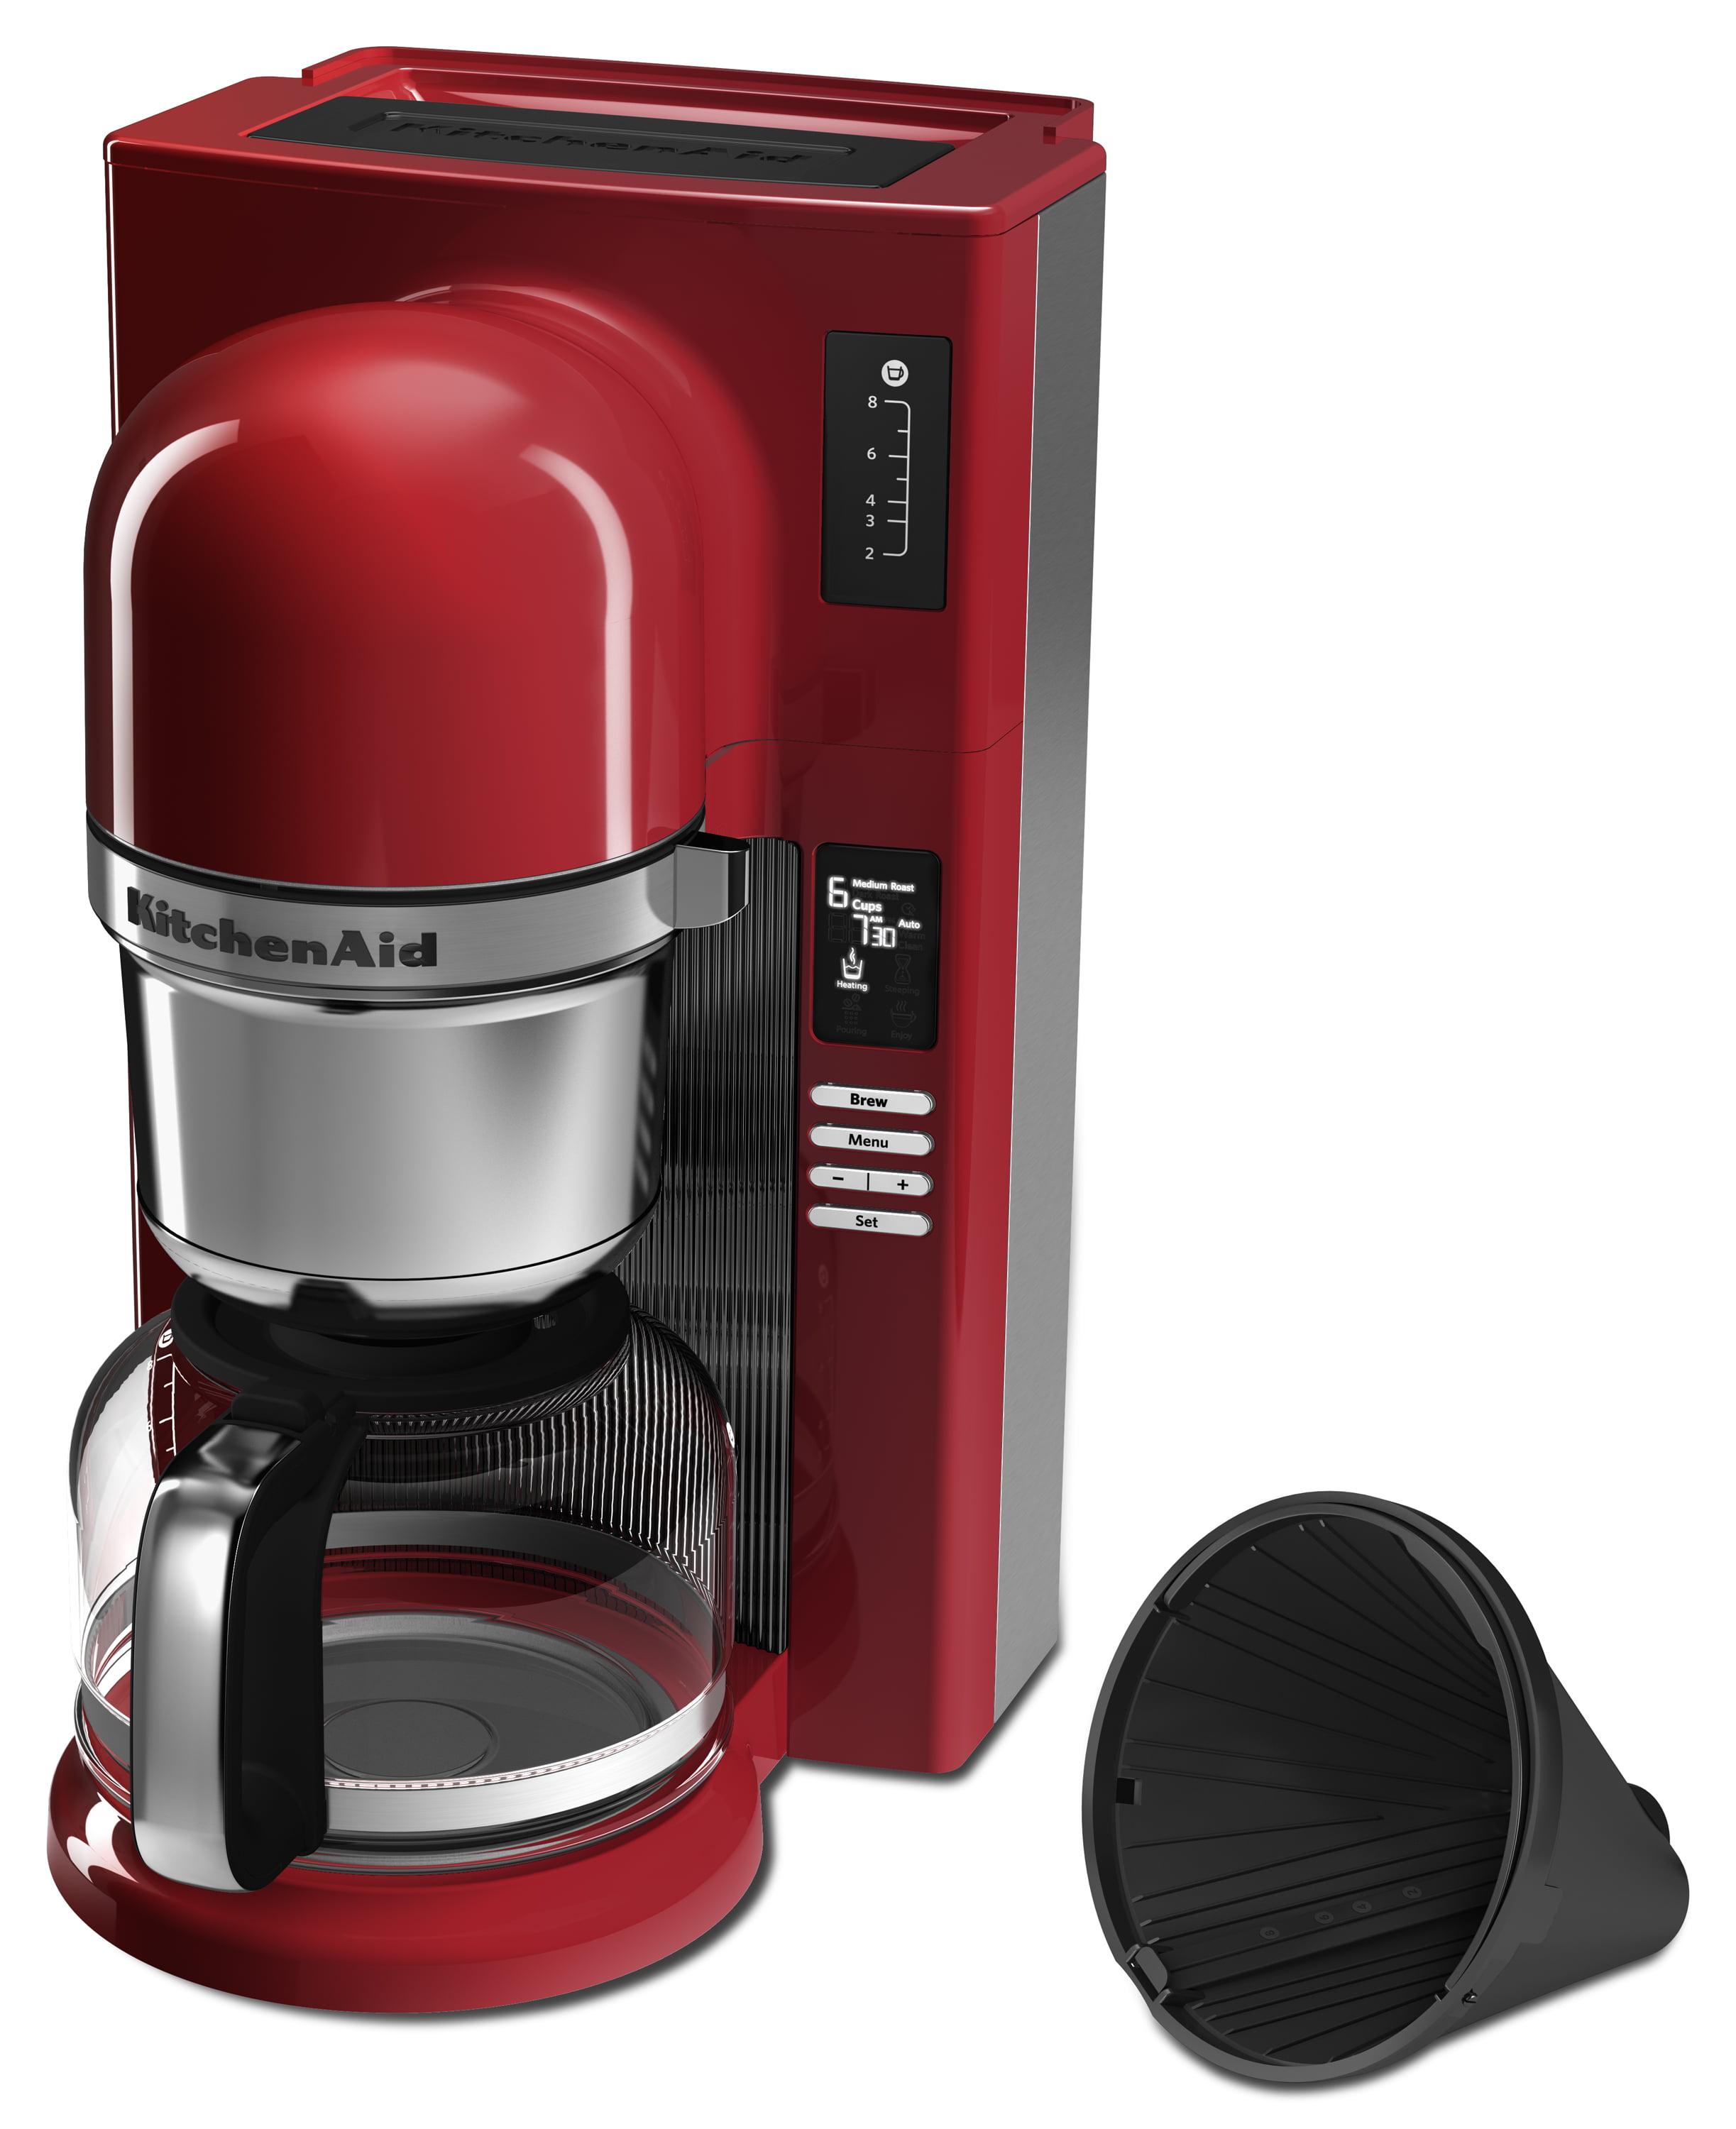 KitchenAid KCM0402ES Espresso Personal Coffee Maker with Optimized Brewing  Technology 